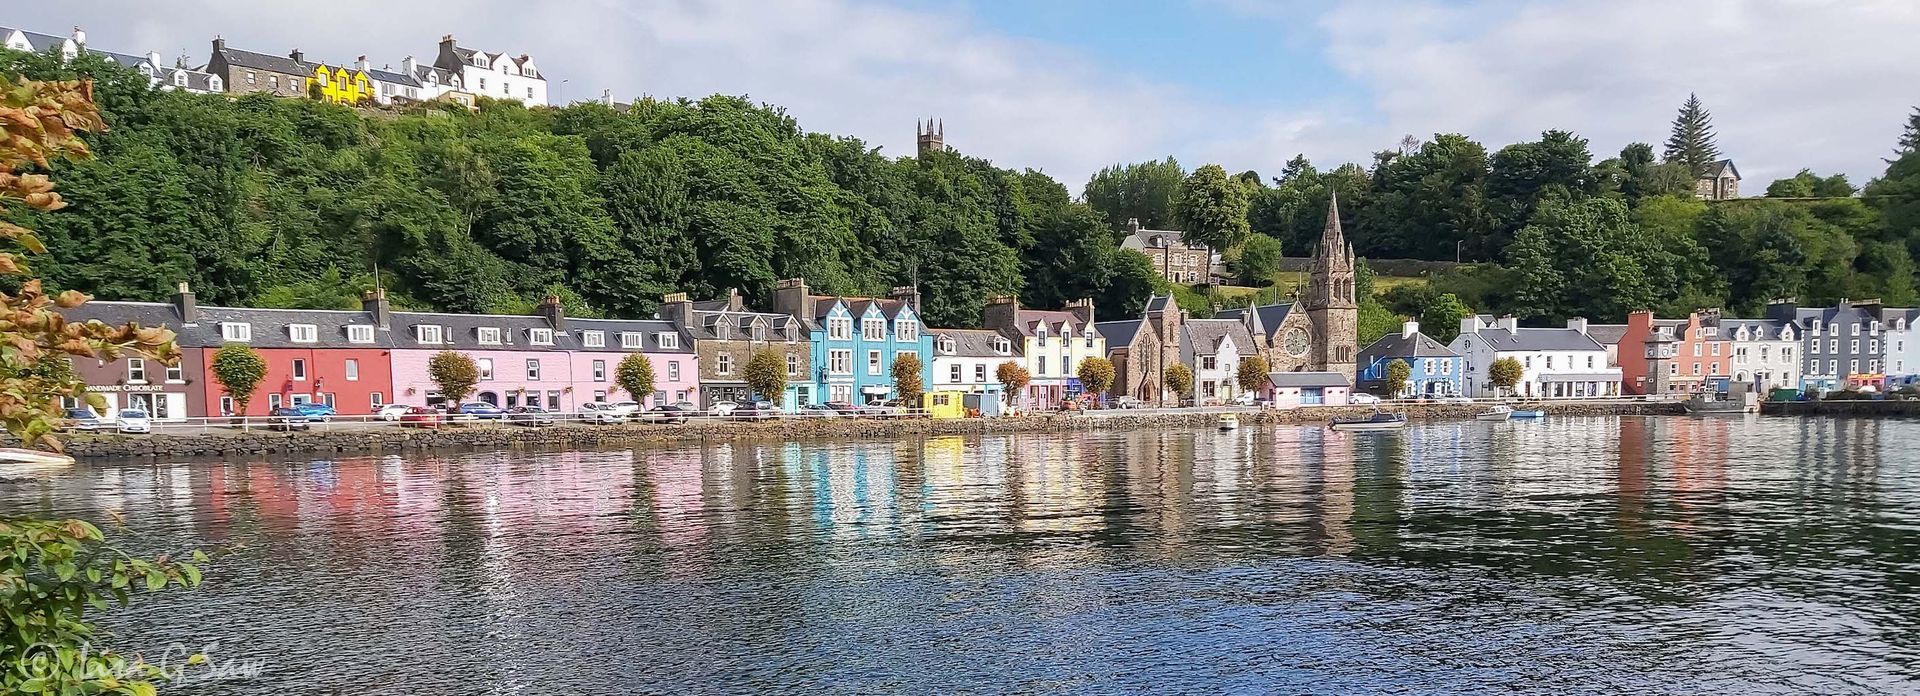 Multi coloured houses in Tobermory